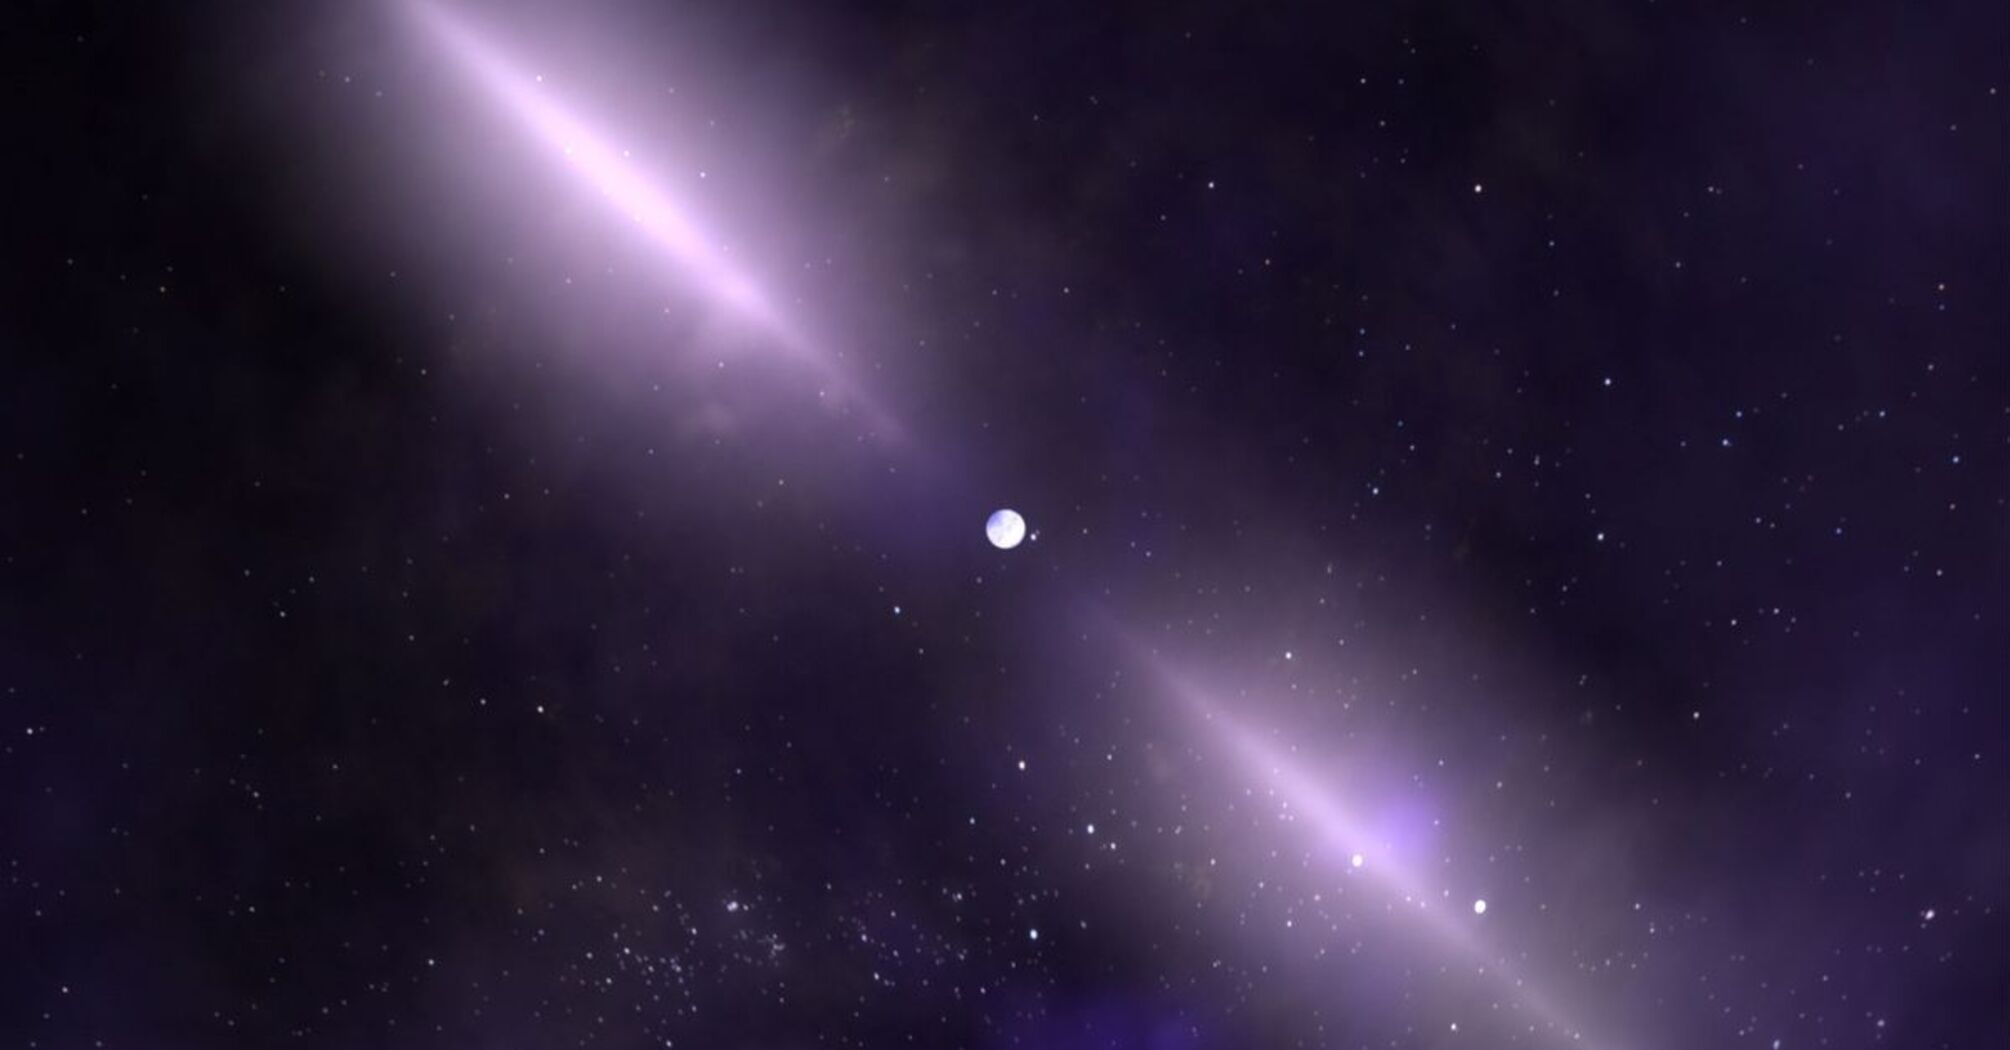 'Glitches' of rapidly spinning neutron star pulsars can be a source of gravitational waves